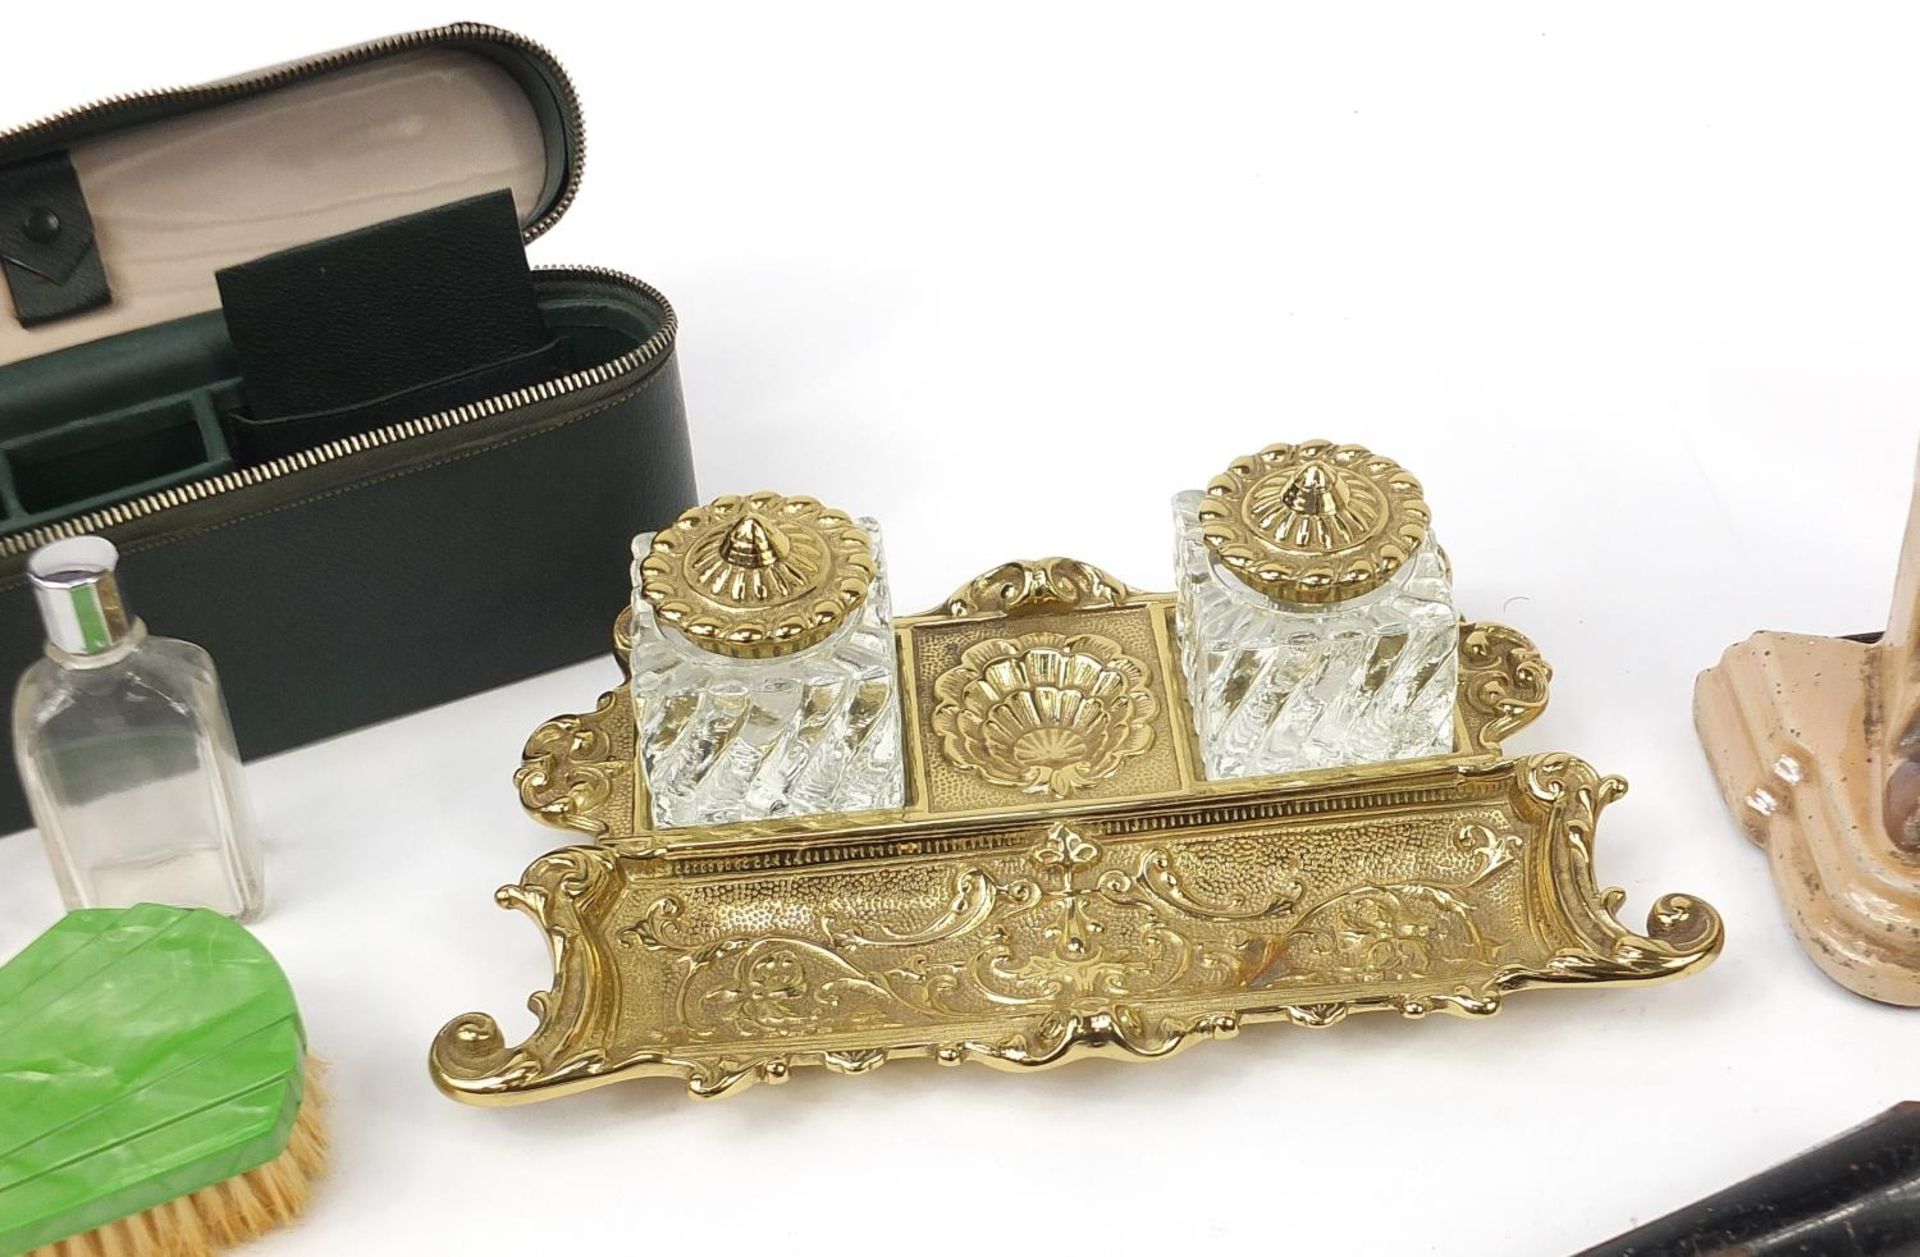 Sundry items including an ornate brass desk stand with glass inkwells and a knight fire companion - Image 3 of 5